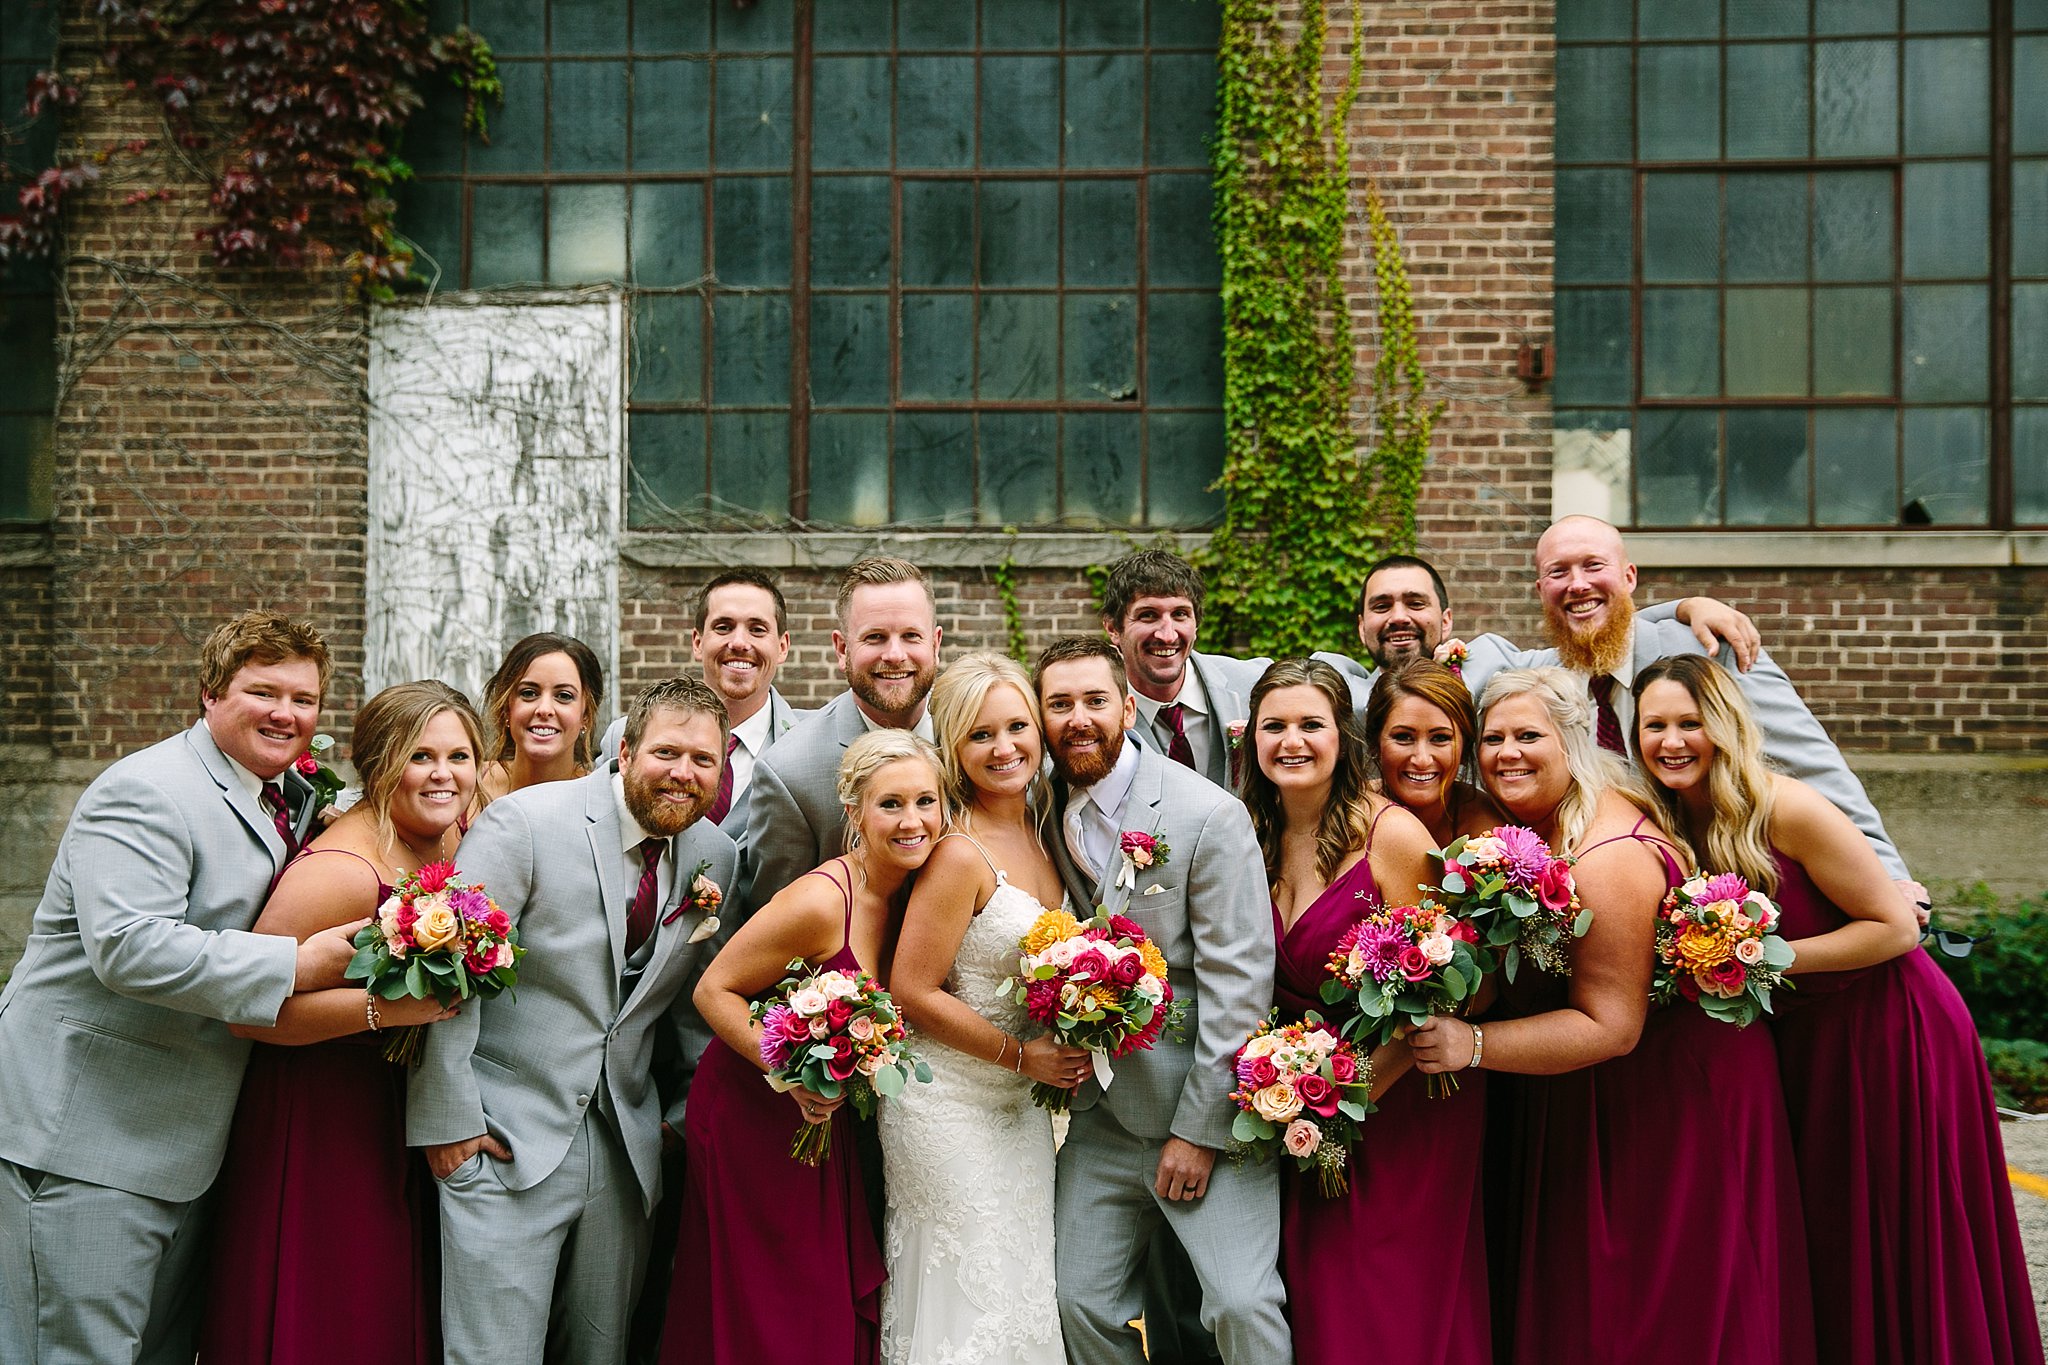 wedding party in Millwork District downtown Dubuque